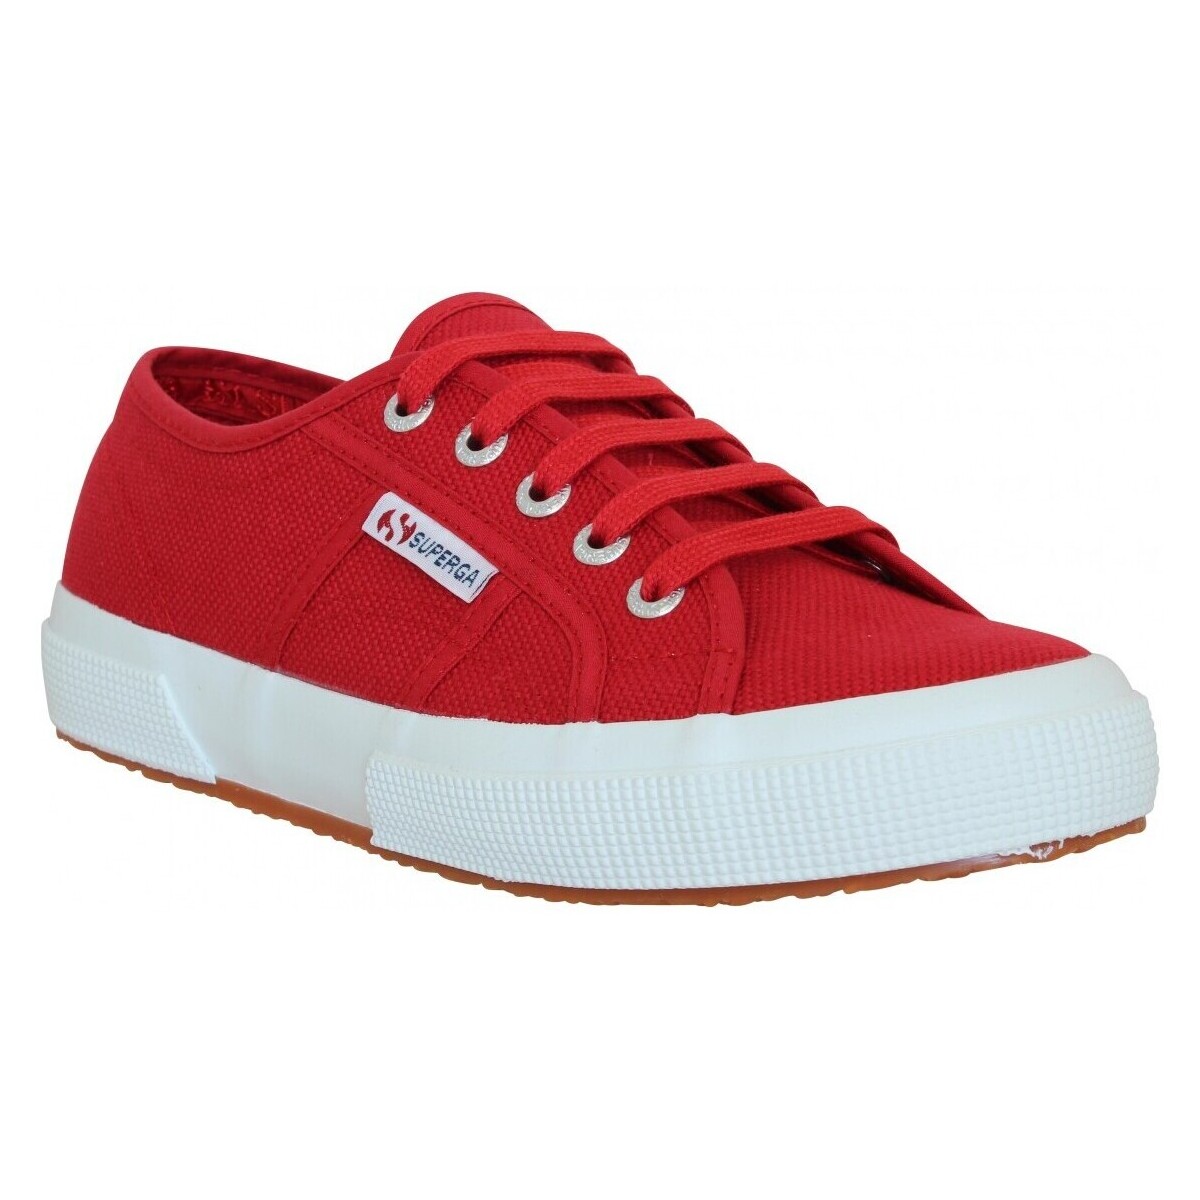 Sneakers Superga 2750 Toile Femme Rouge